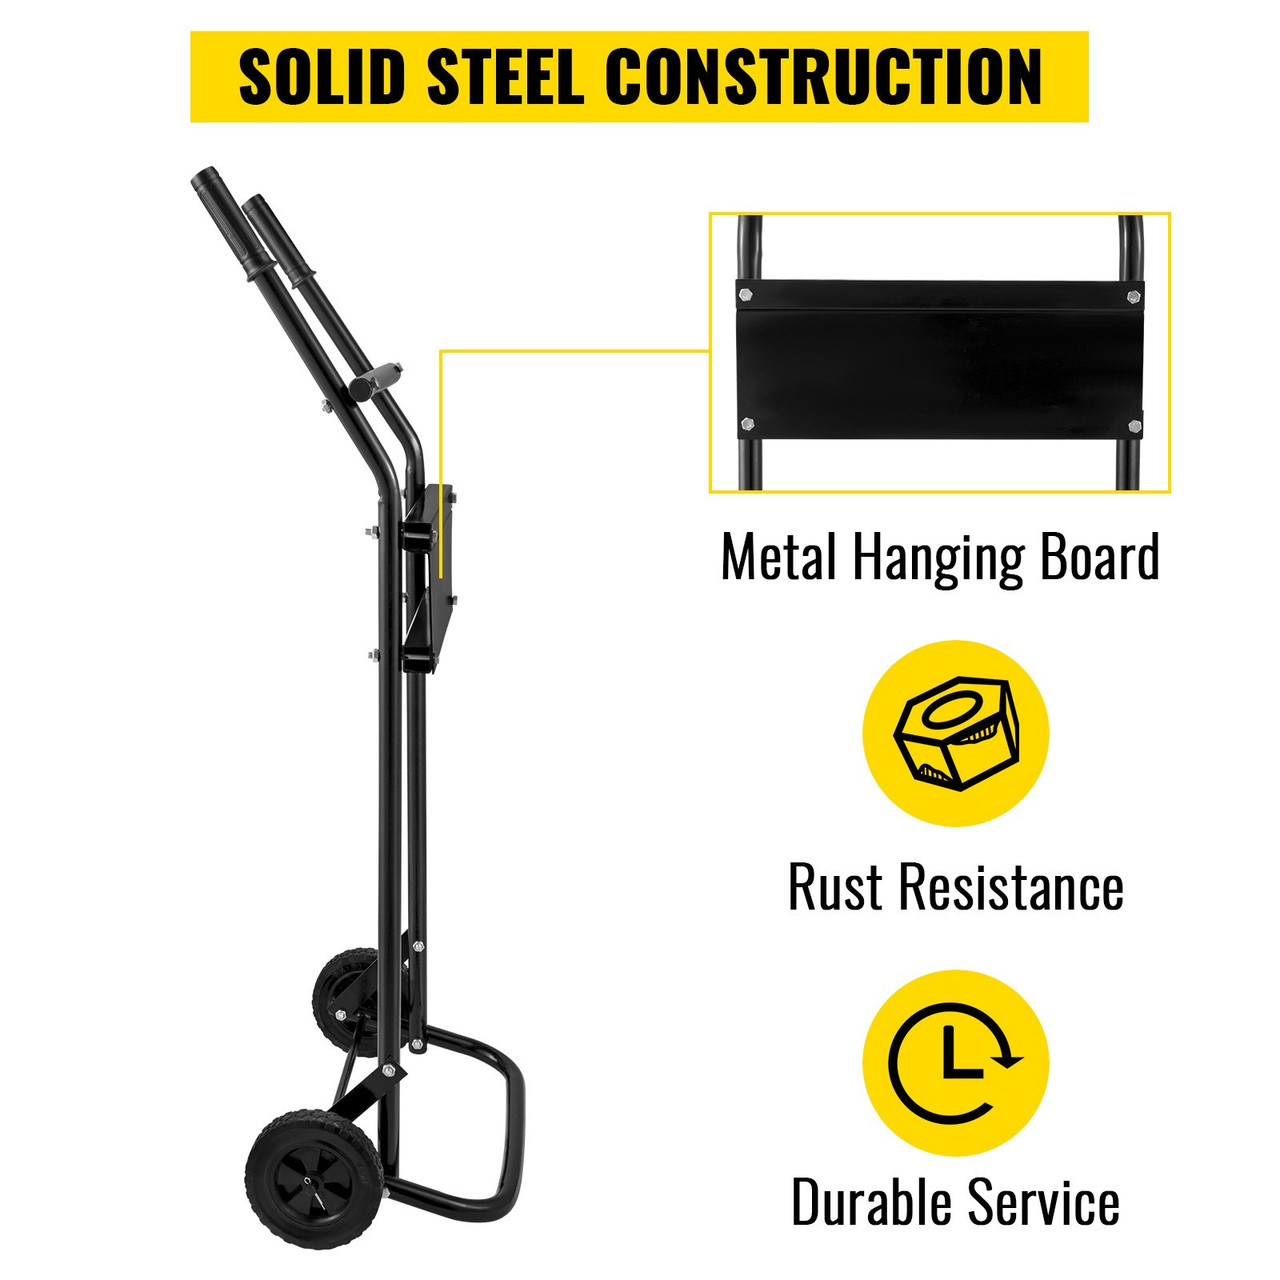 Boat Motor Stand, 130 LBS Outboard Motor Carrier, 60 KG Outboard Engine Stand, Two Wheels Boat Motor Dolly, Heavy Duty Multi Purposed Portable Boat Motor for Motor Repair, Maintenance, Storage